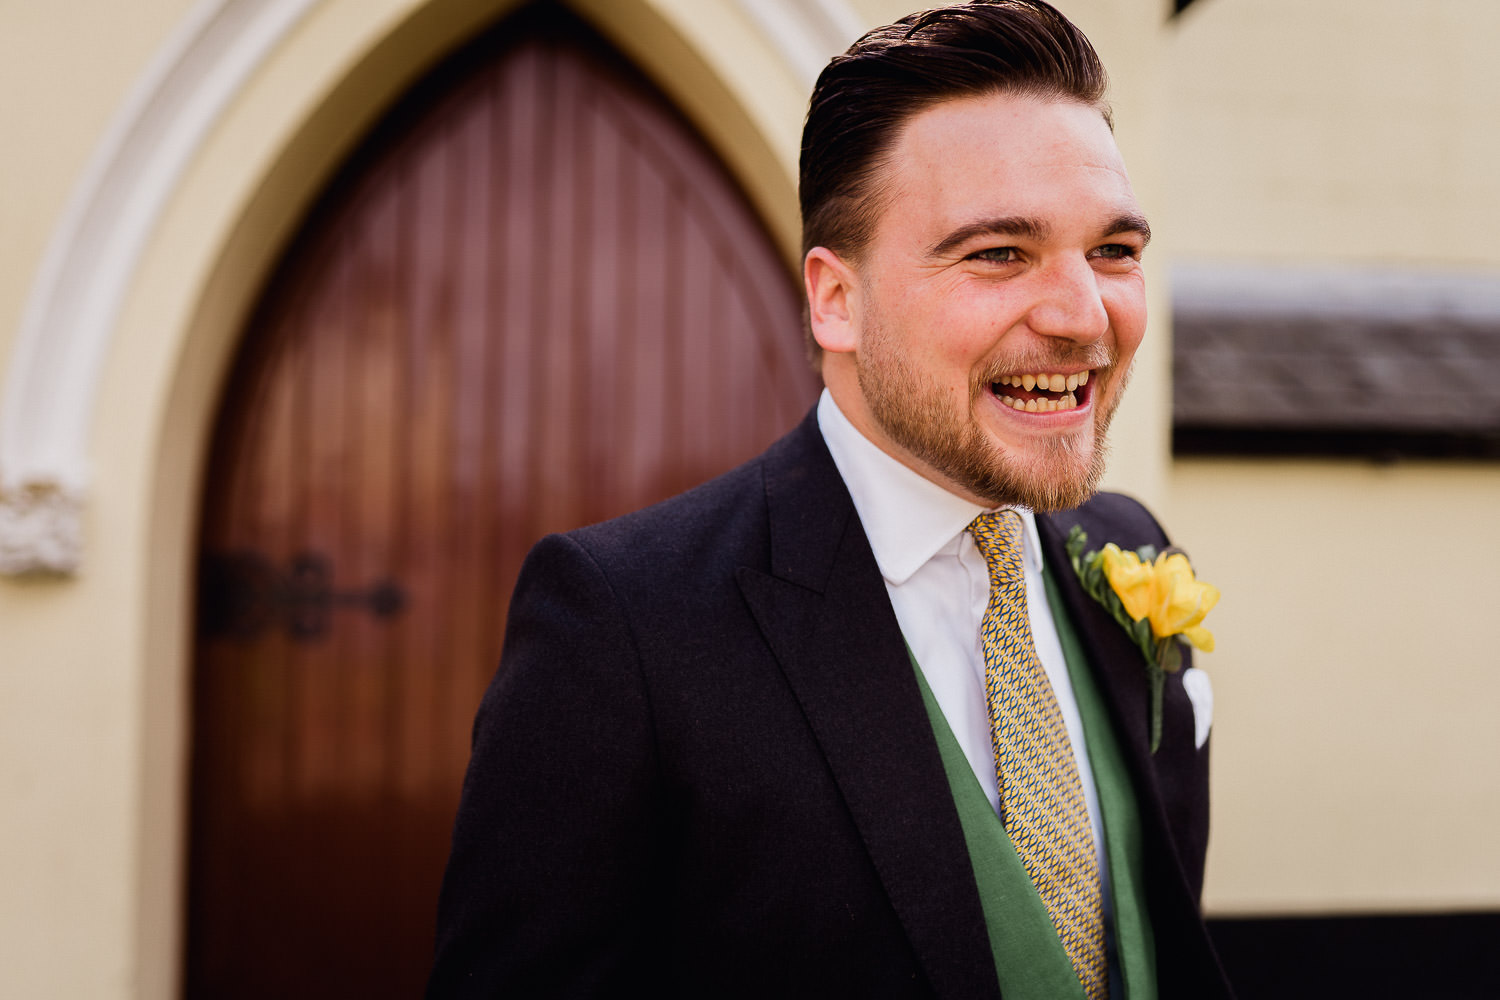 groom laughing outside a church